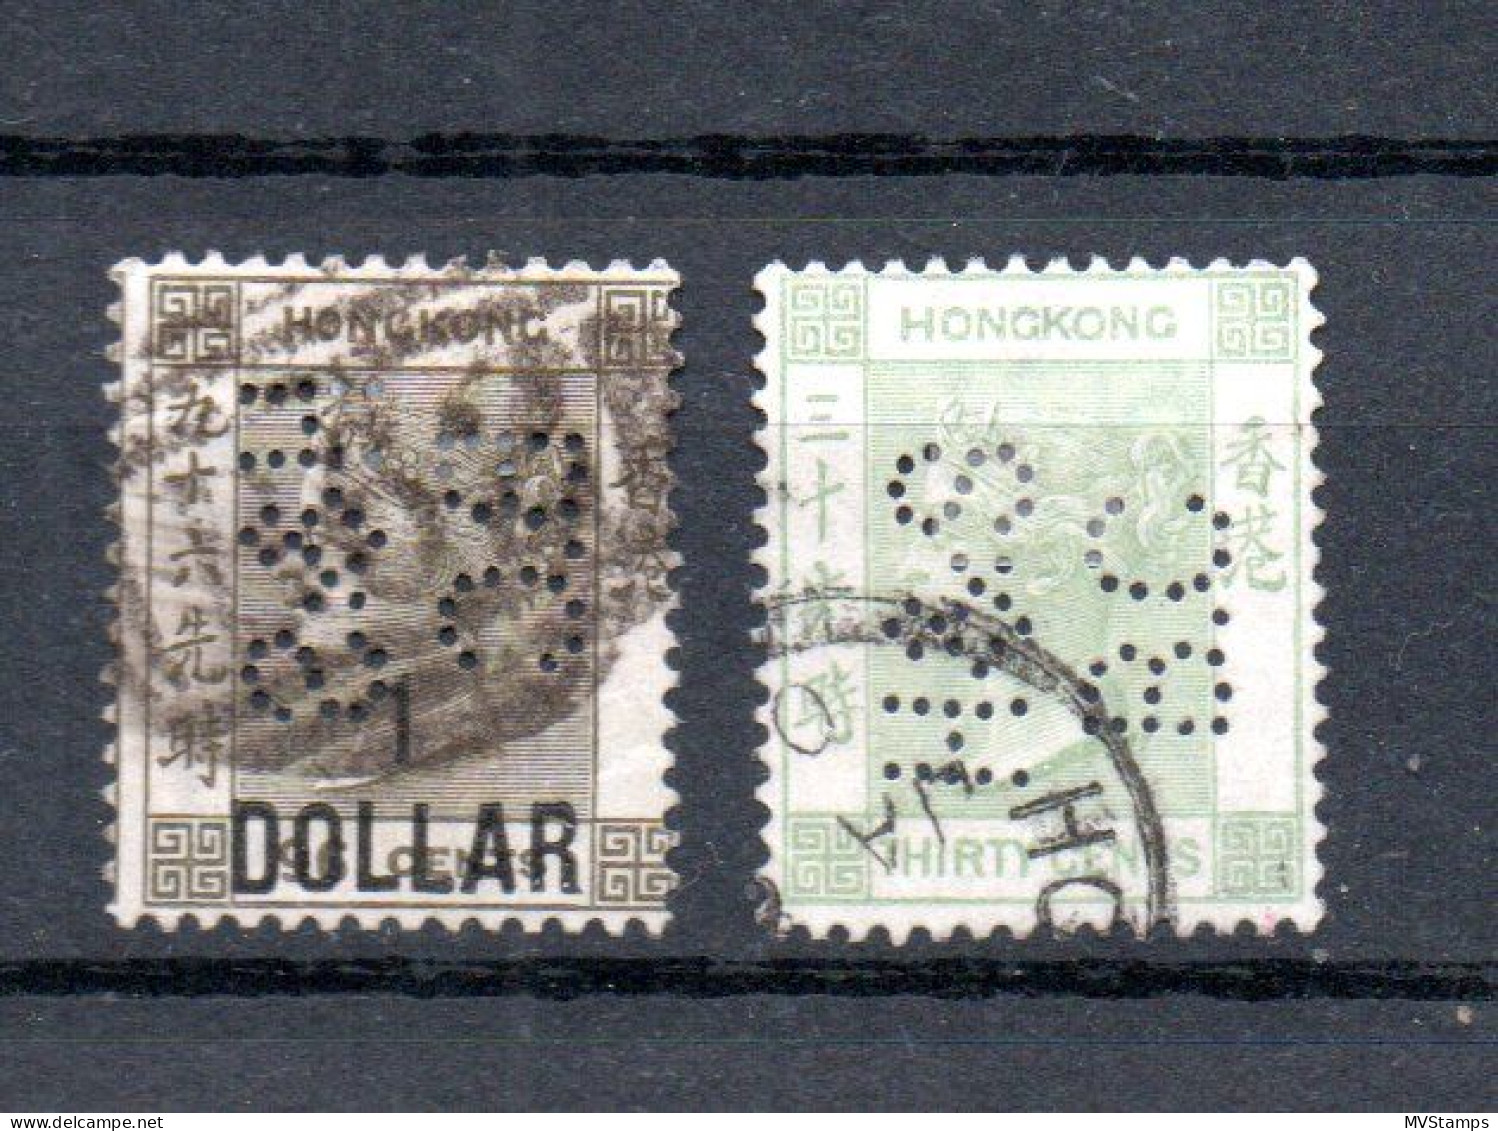 Hong Kong 1885/91 Old Def.Victoria Stamps With Perforation (HSBC) Nice Used - Usados